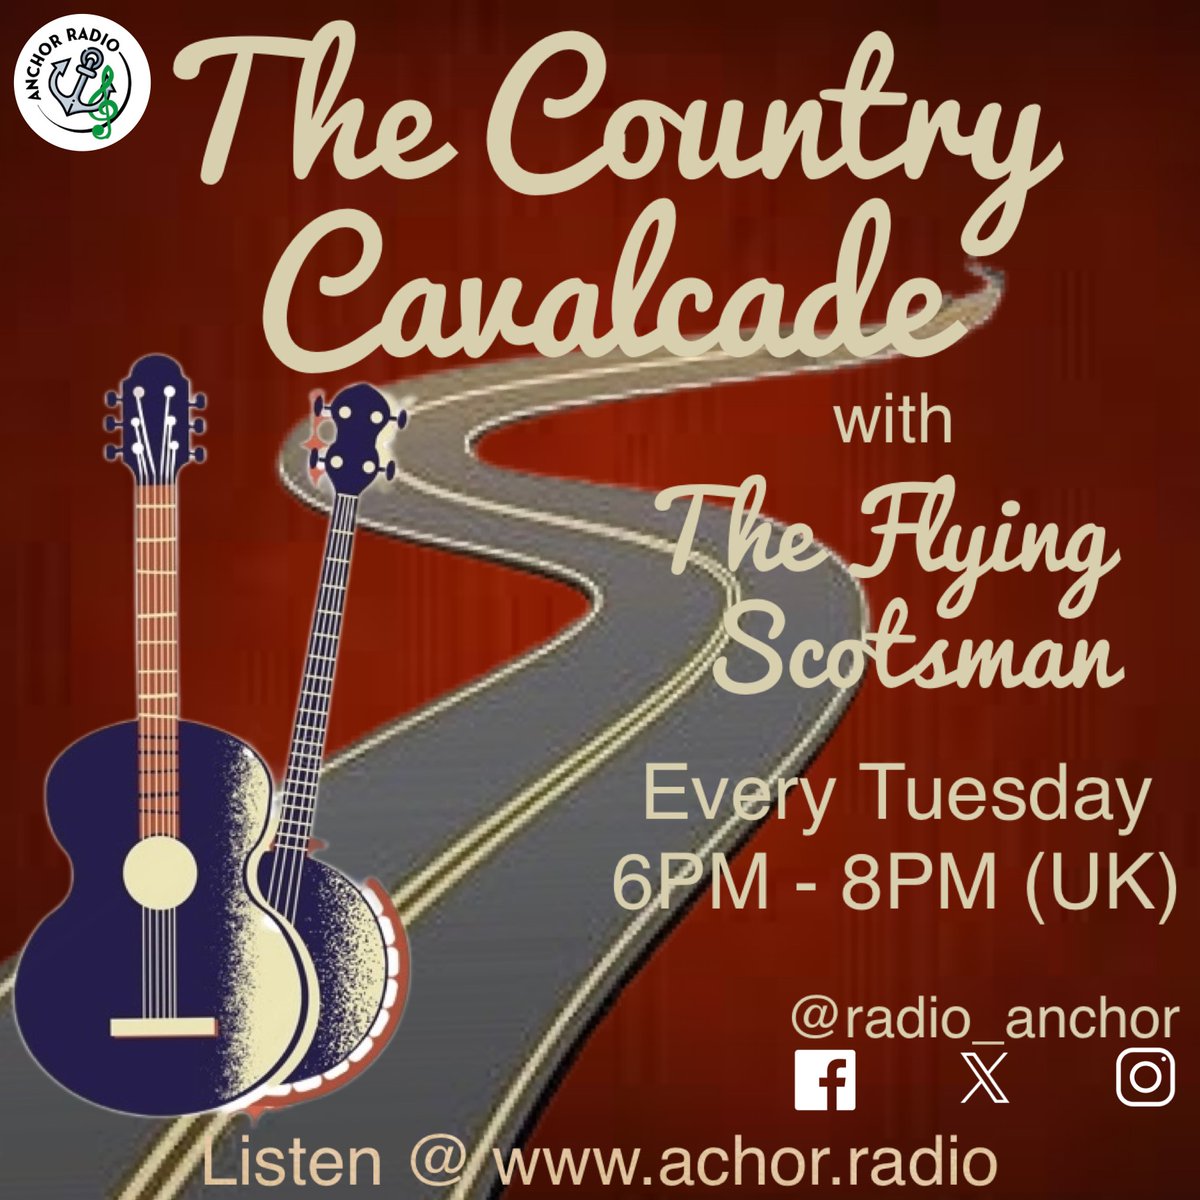 Hey all! This week is Autism Acceptance week, so in that spirit, you can have a second chance to hear the Autism Acceptance Special of the Country Cavalcade. Tune in at anchor.radio or ask your digital assistant to open Anchor Radio